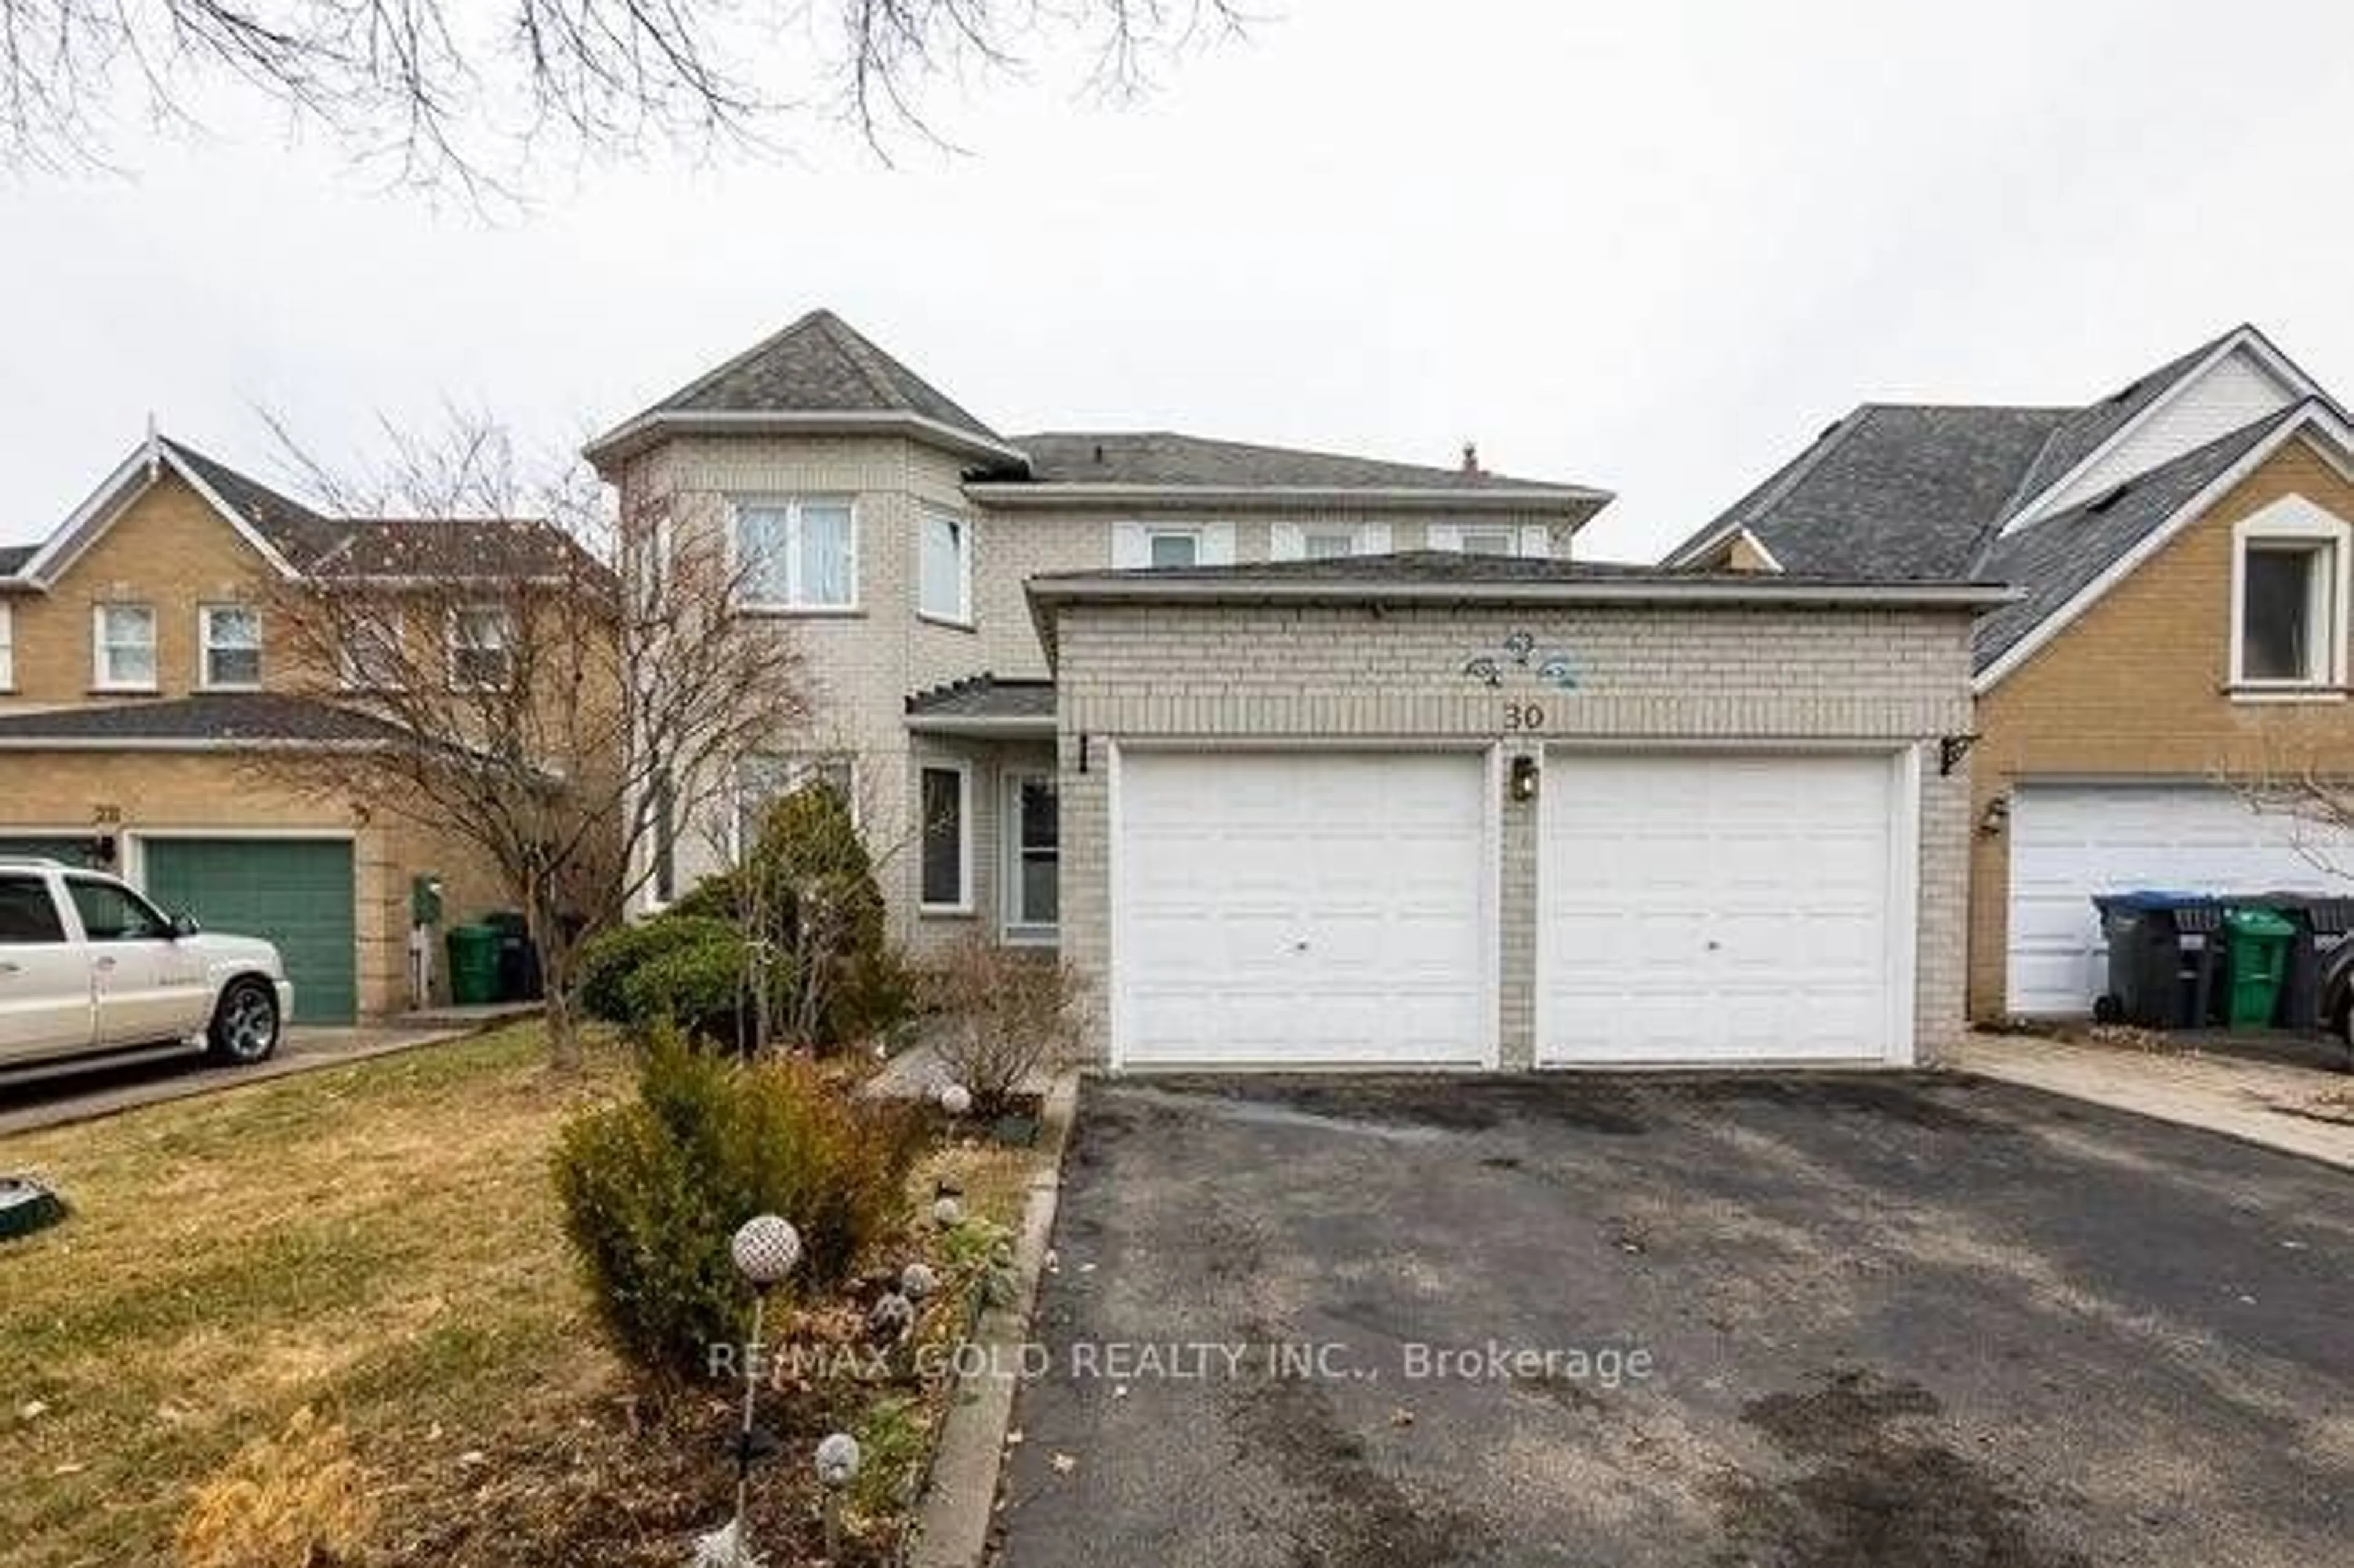 Frontside or backside of a home for 30 Pineway Pl, Brampton Ontario L6S 5S5